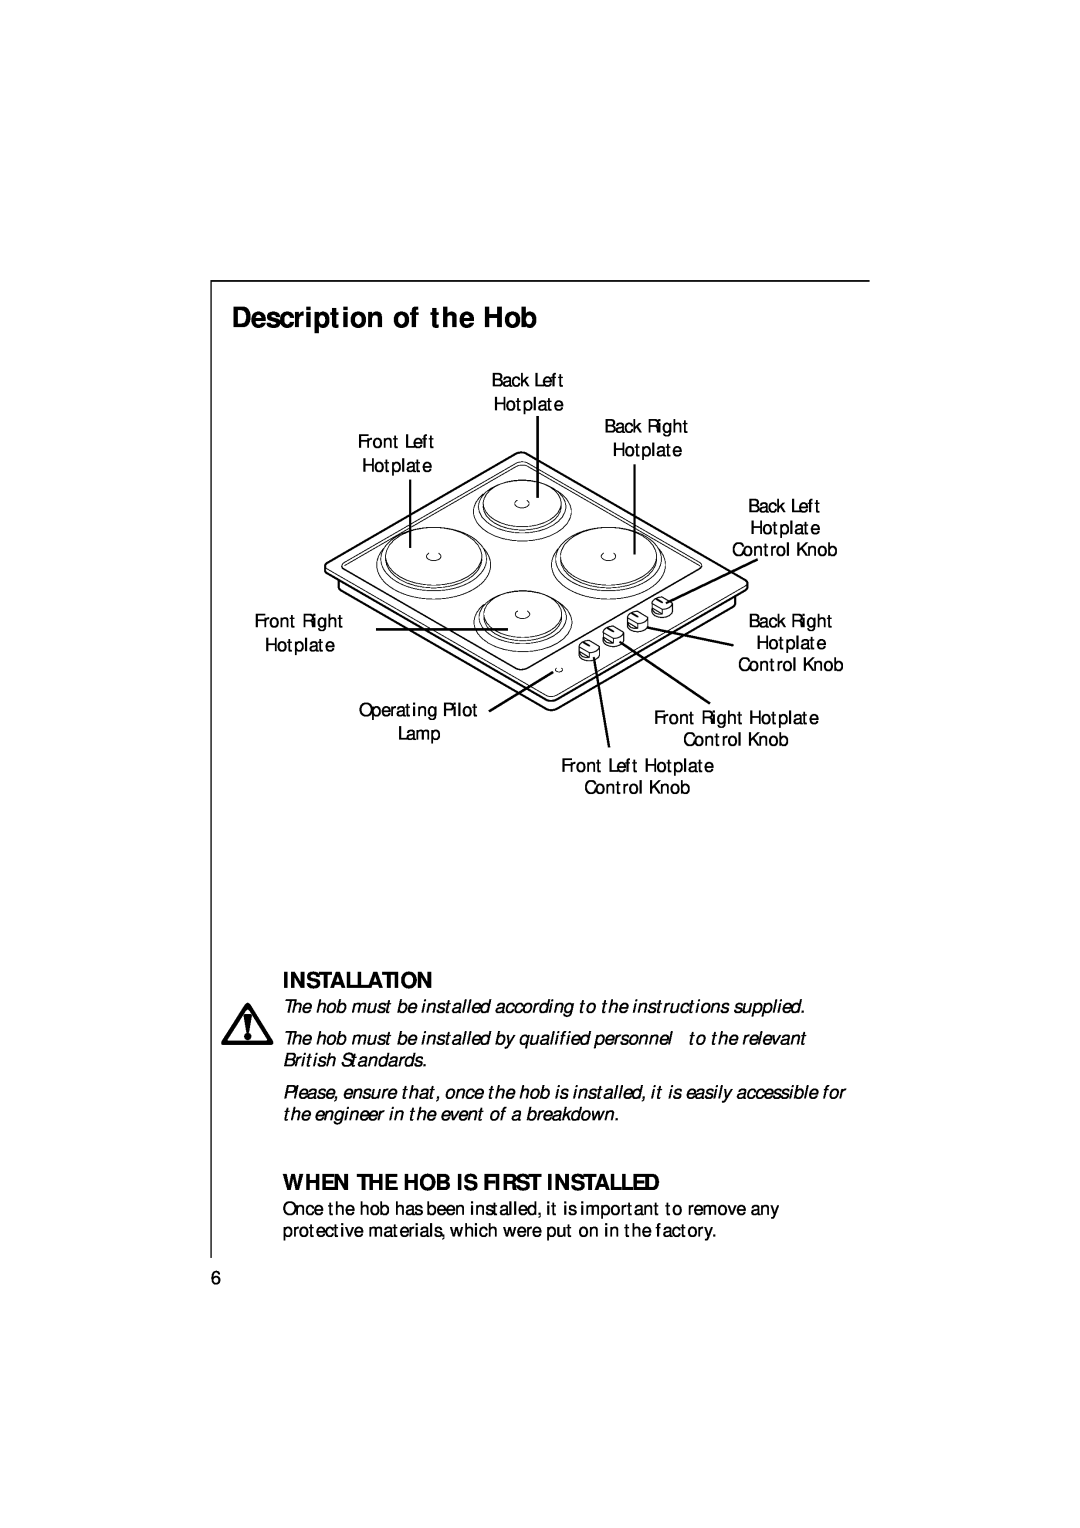 AEG 111 K - W/D/G manual Description of the Hob, Installation, When The Hob Is First Installed 